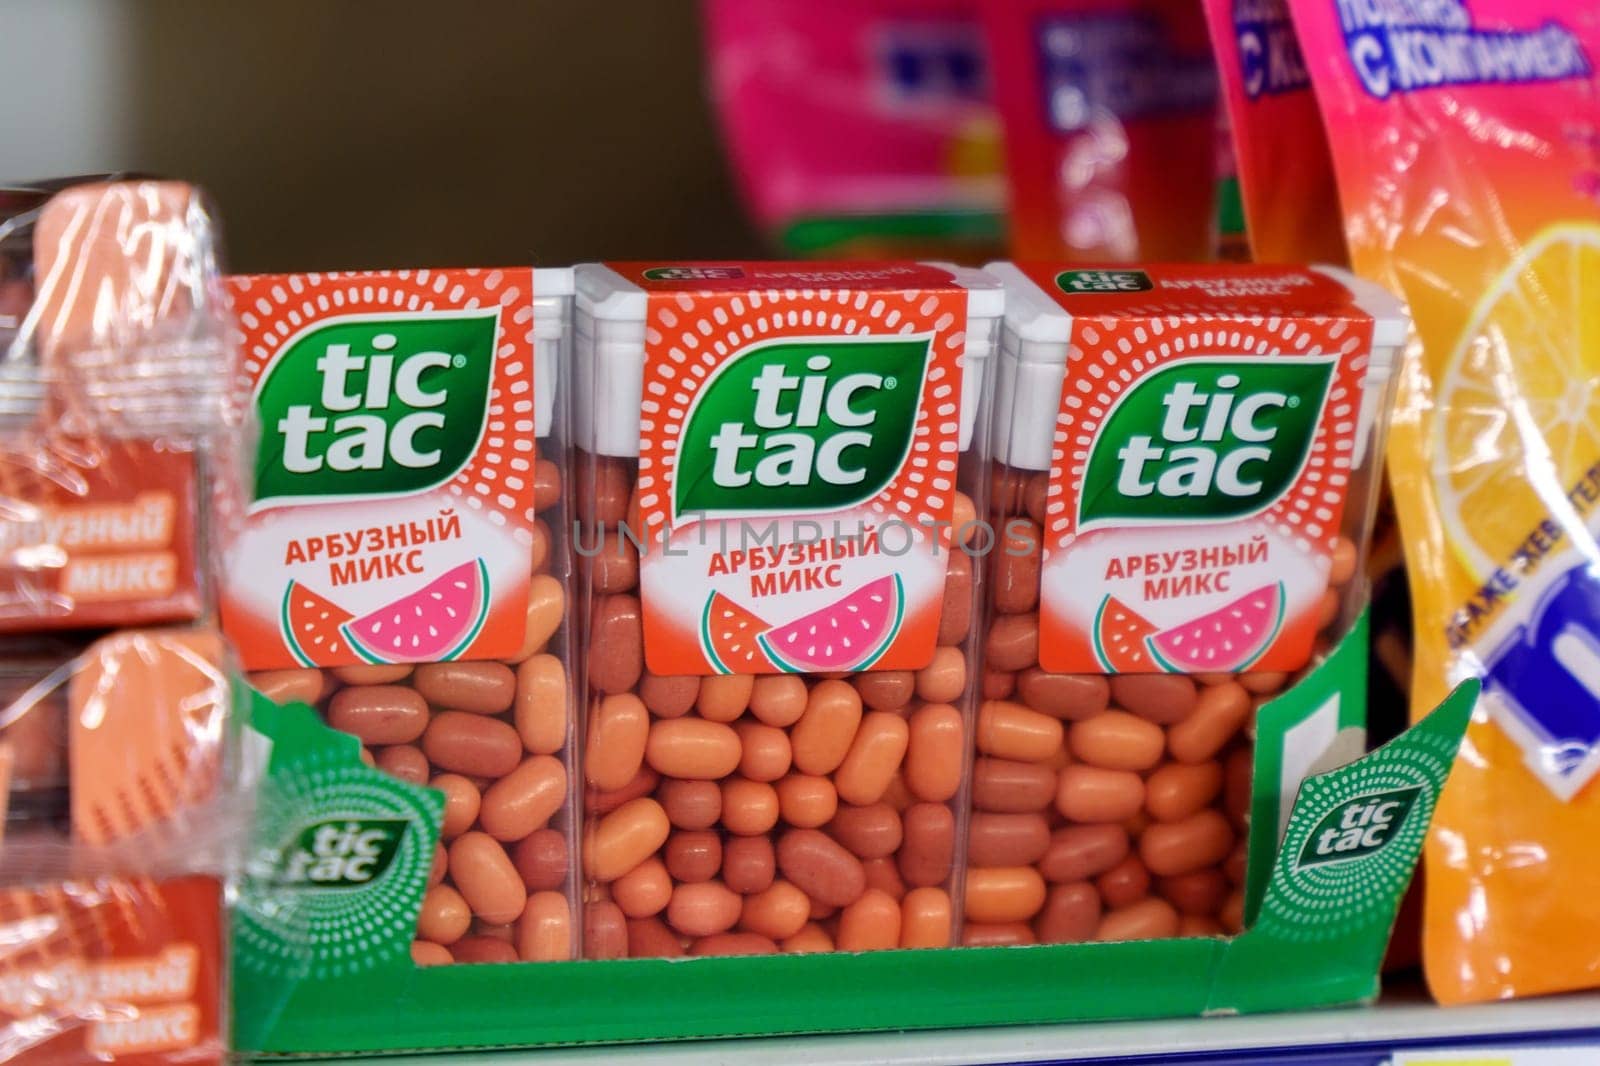 Tyumen, Russia-March 17, 2023: Tic tac are manufactured by Italian confectioner Ferrero and were first produced in 1968. Selective focus